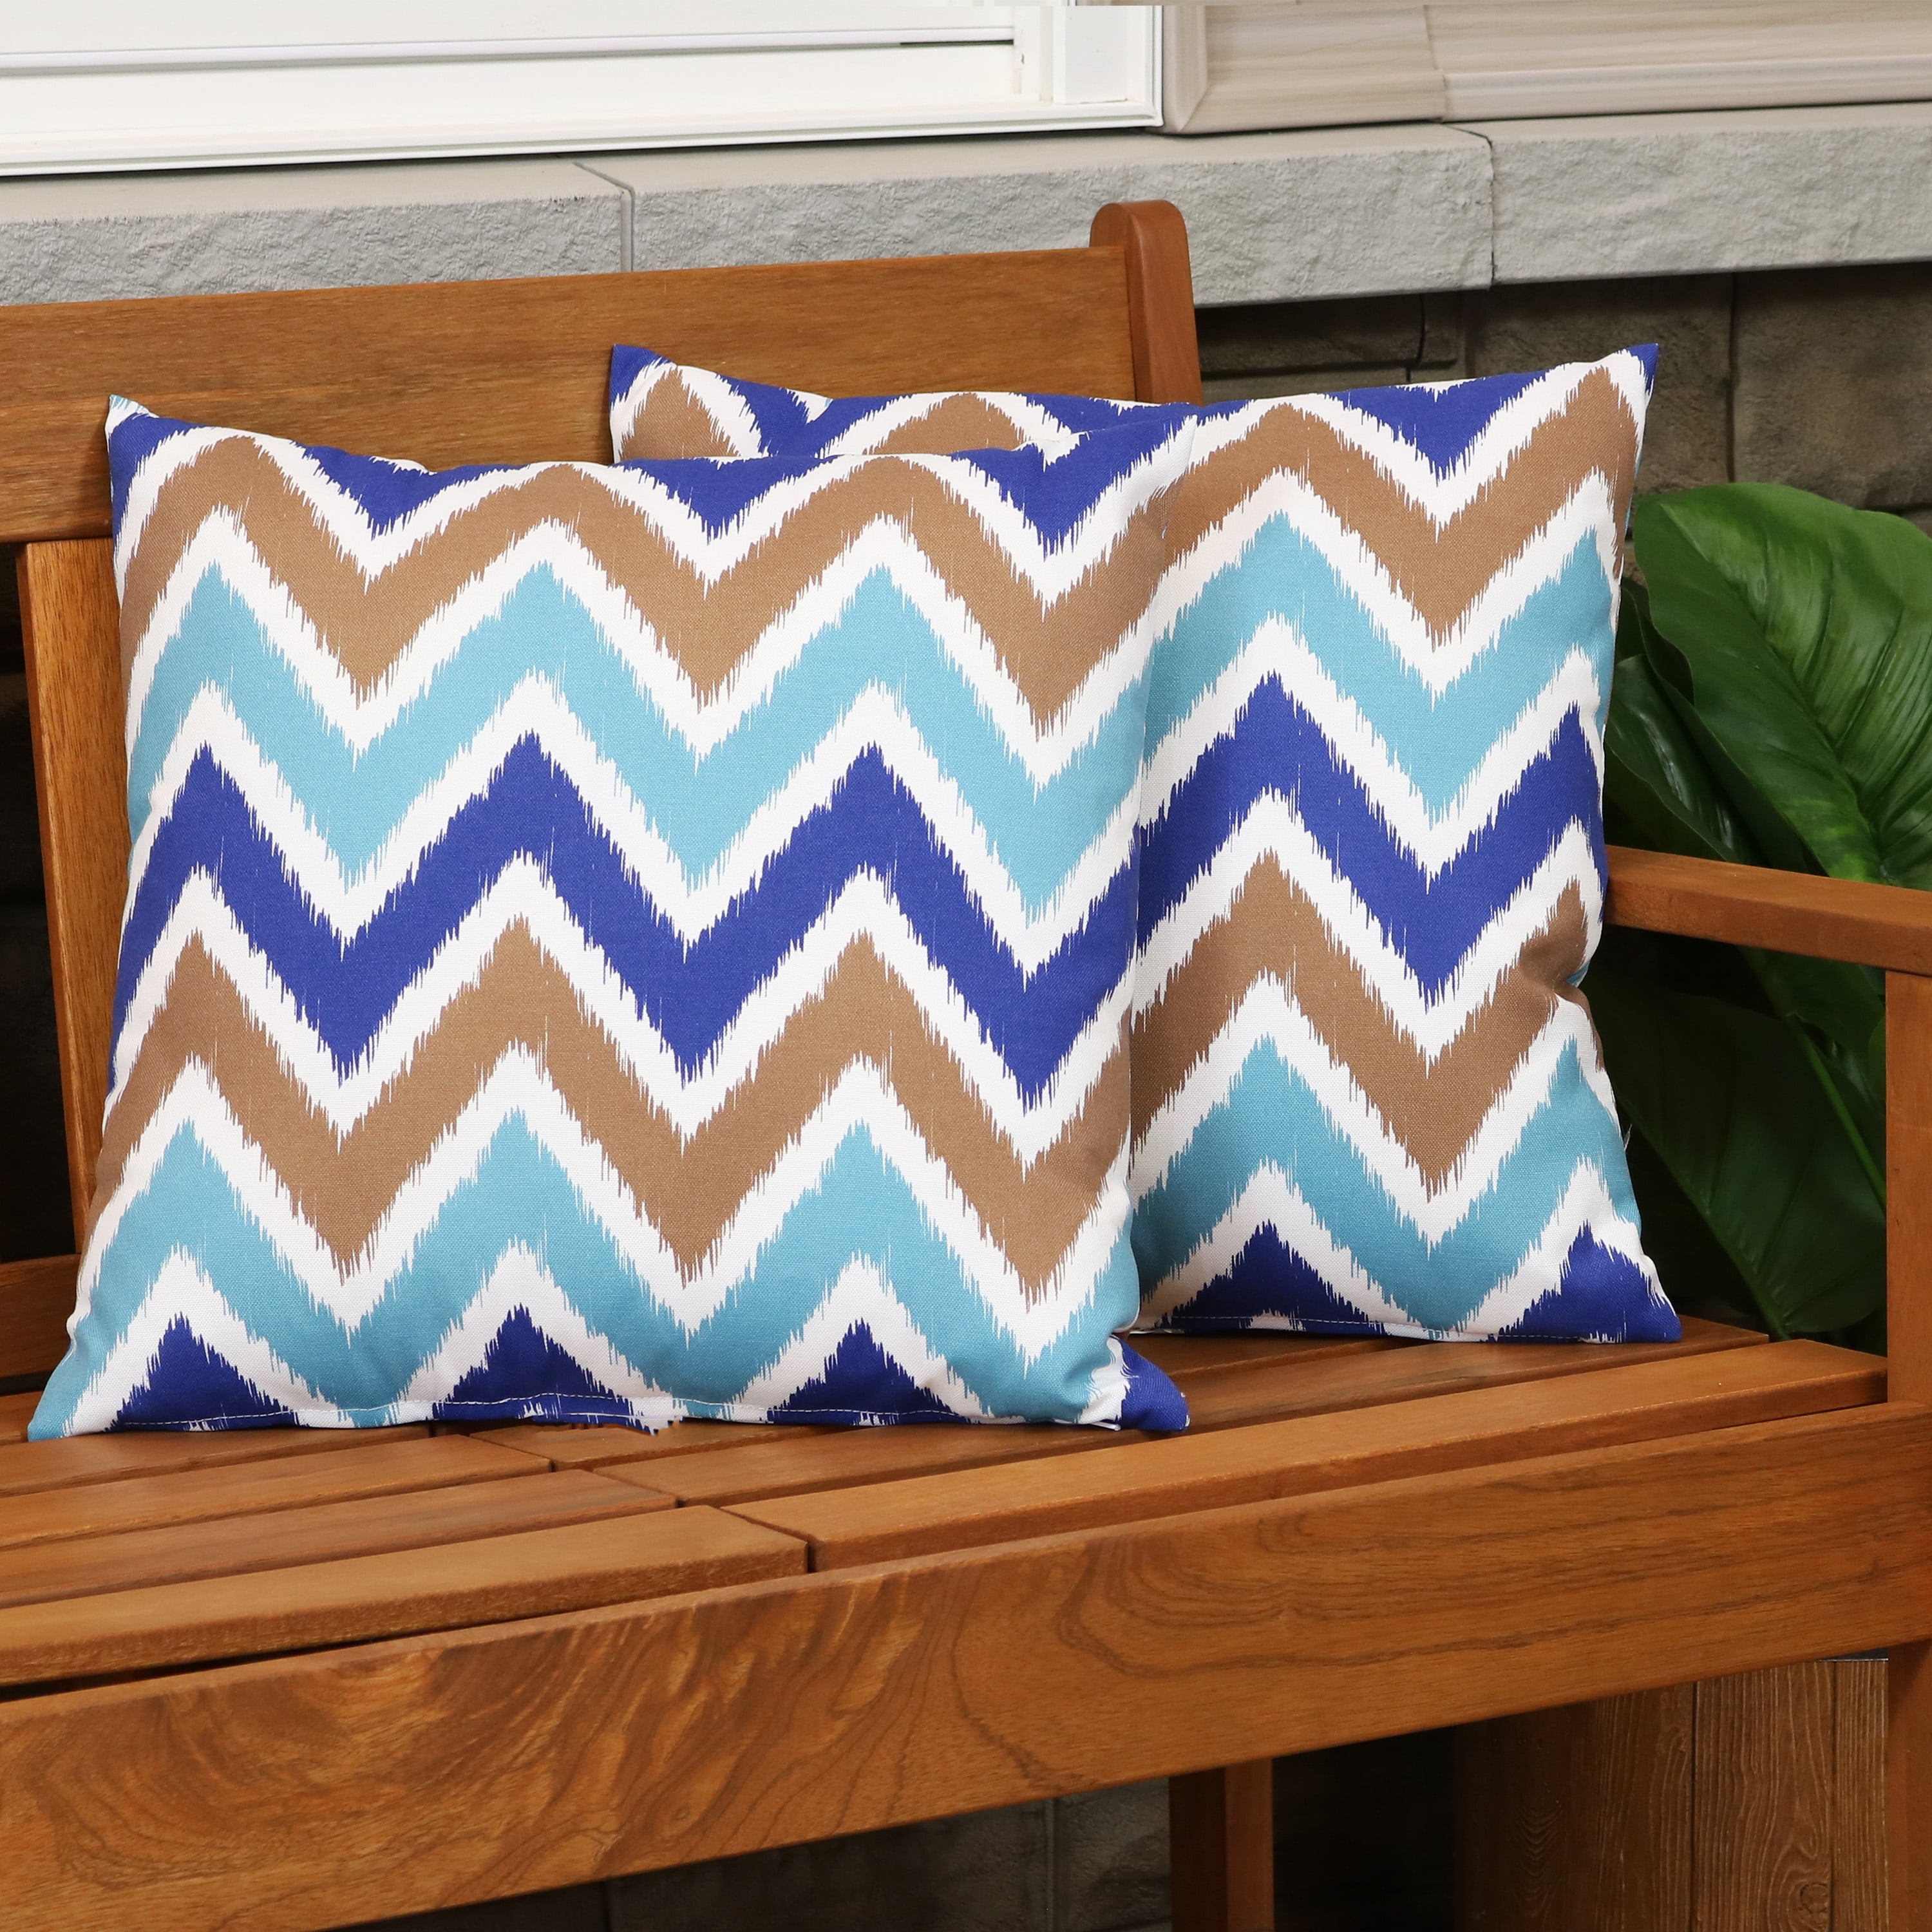 Weather-Resistant Polyester 17 x 17 Inch Small Square Pillow Covers Set of 2 Zipper Closures Sunnydaze Indoor and Outdoor Decorative Throw Pillow Covers Cover ONLY Beach-Bound Stripe